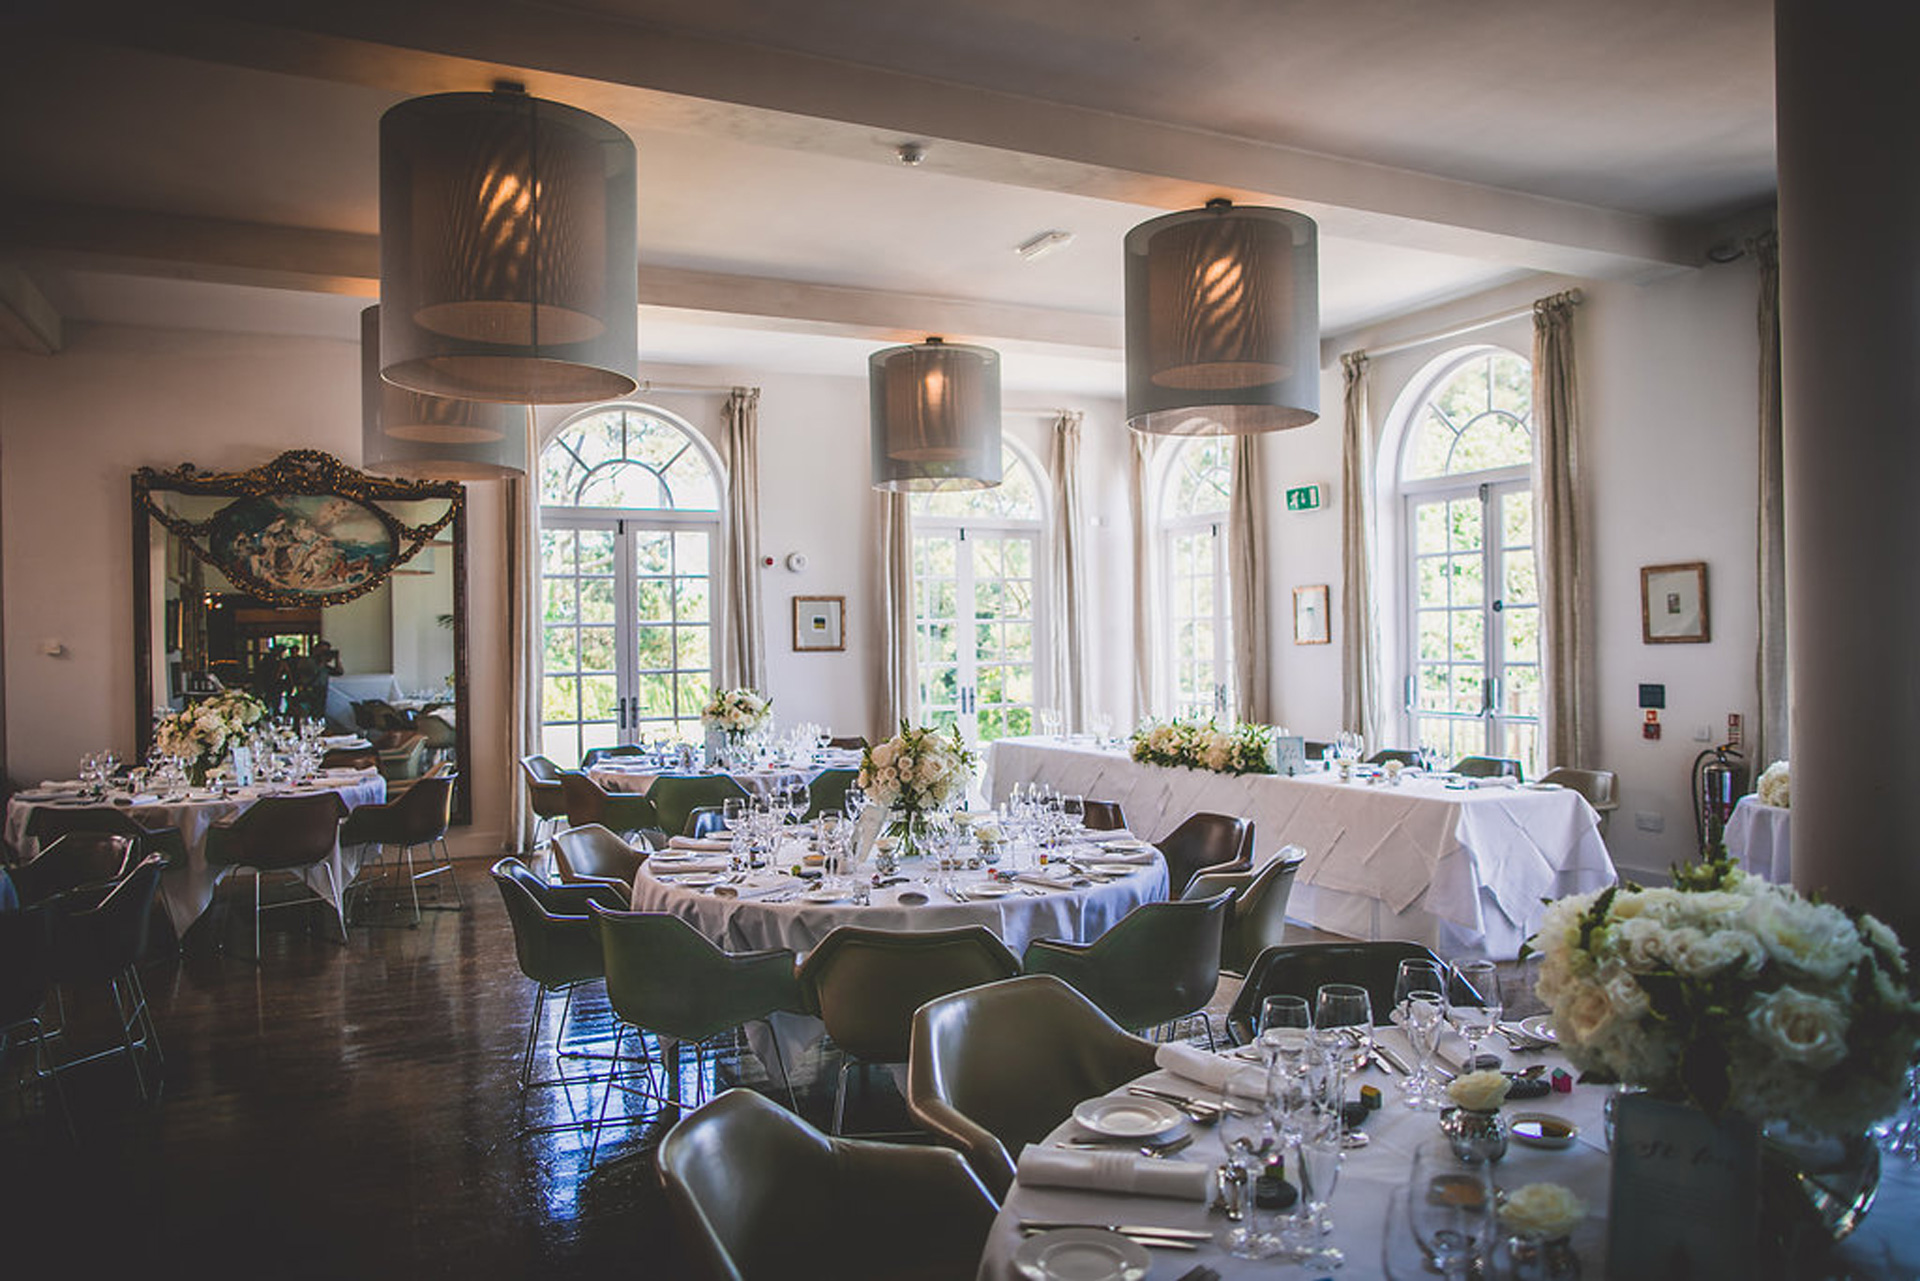 Fantastic wedding venues: A review of the Fowey Hall Hotel, Cornwall